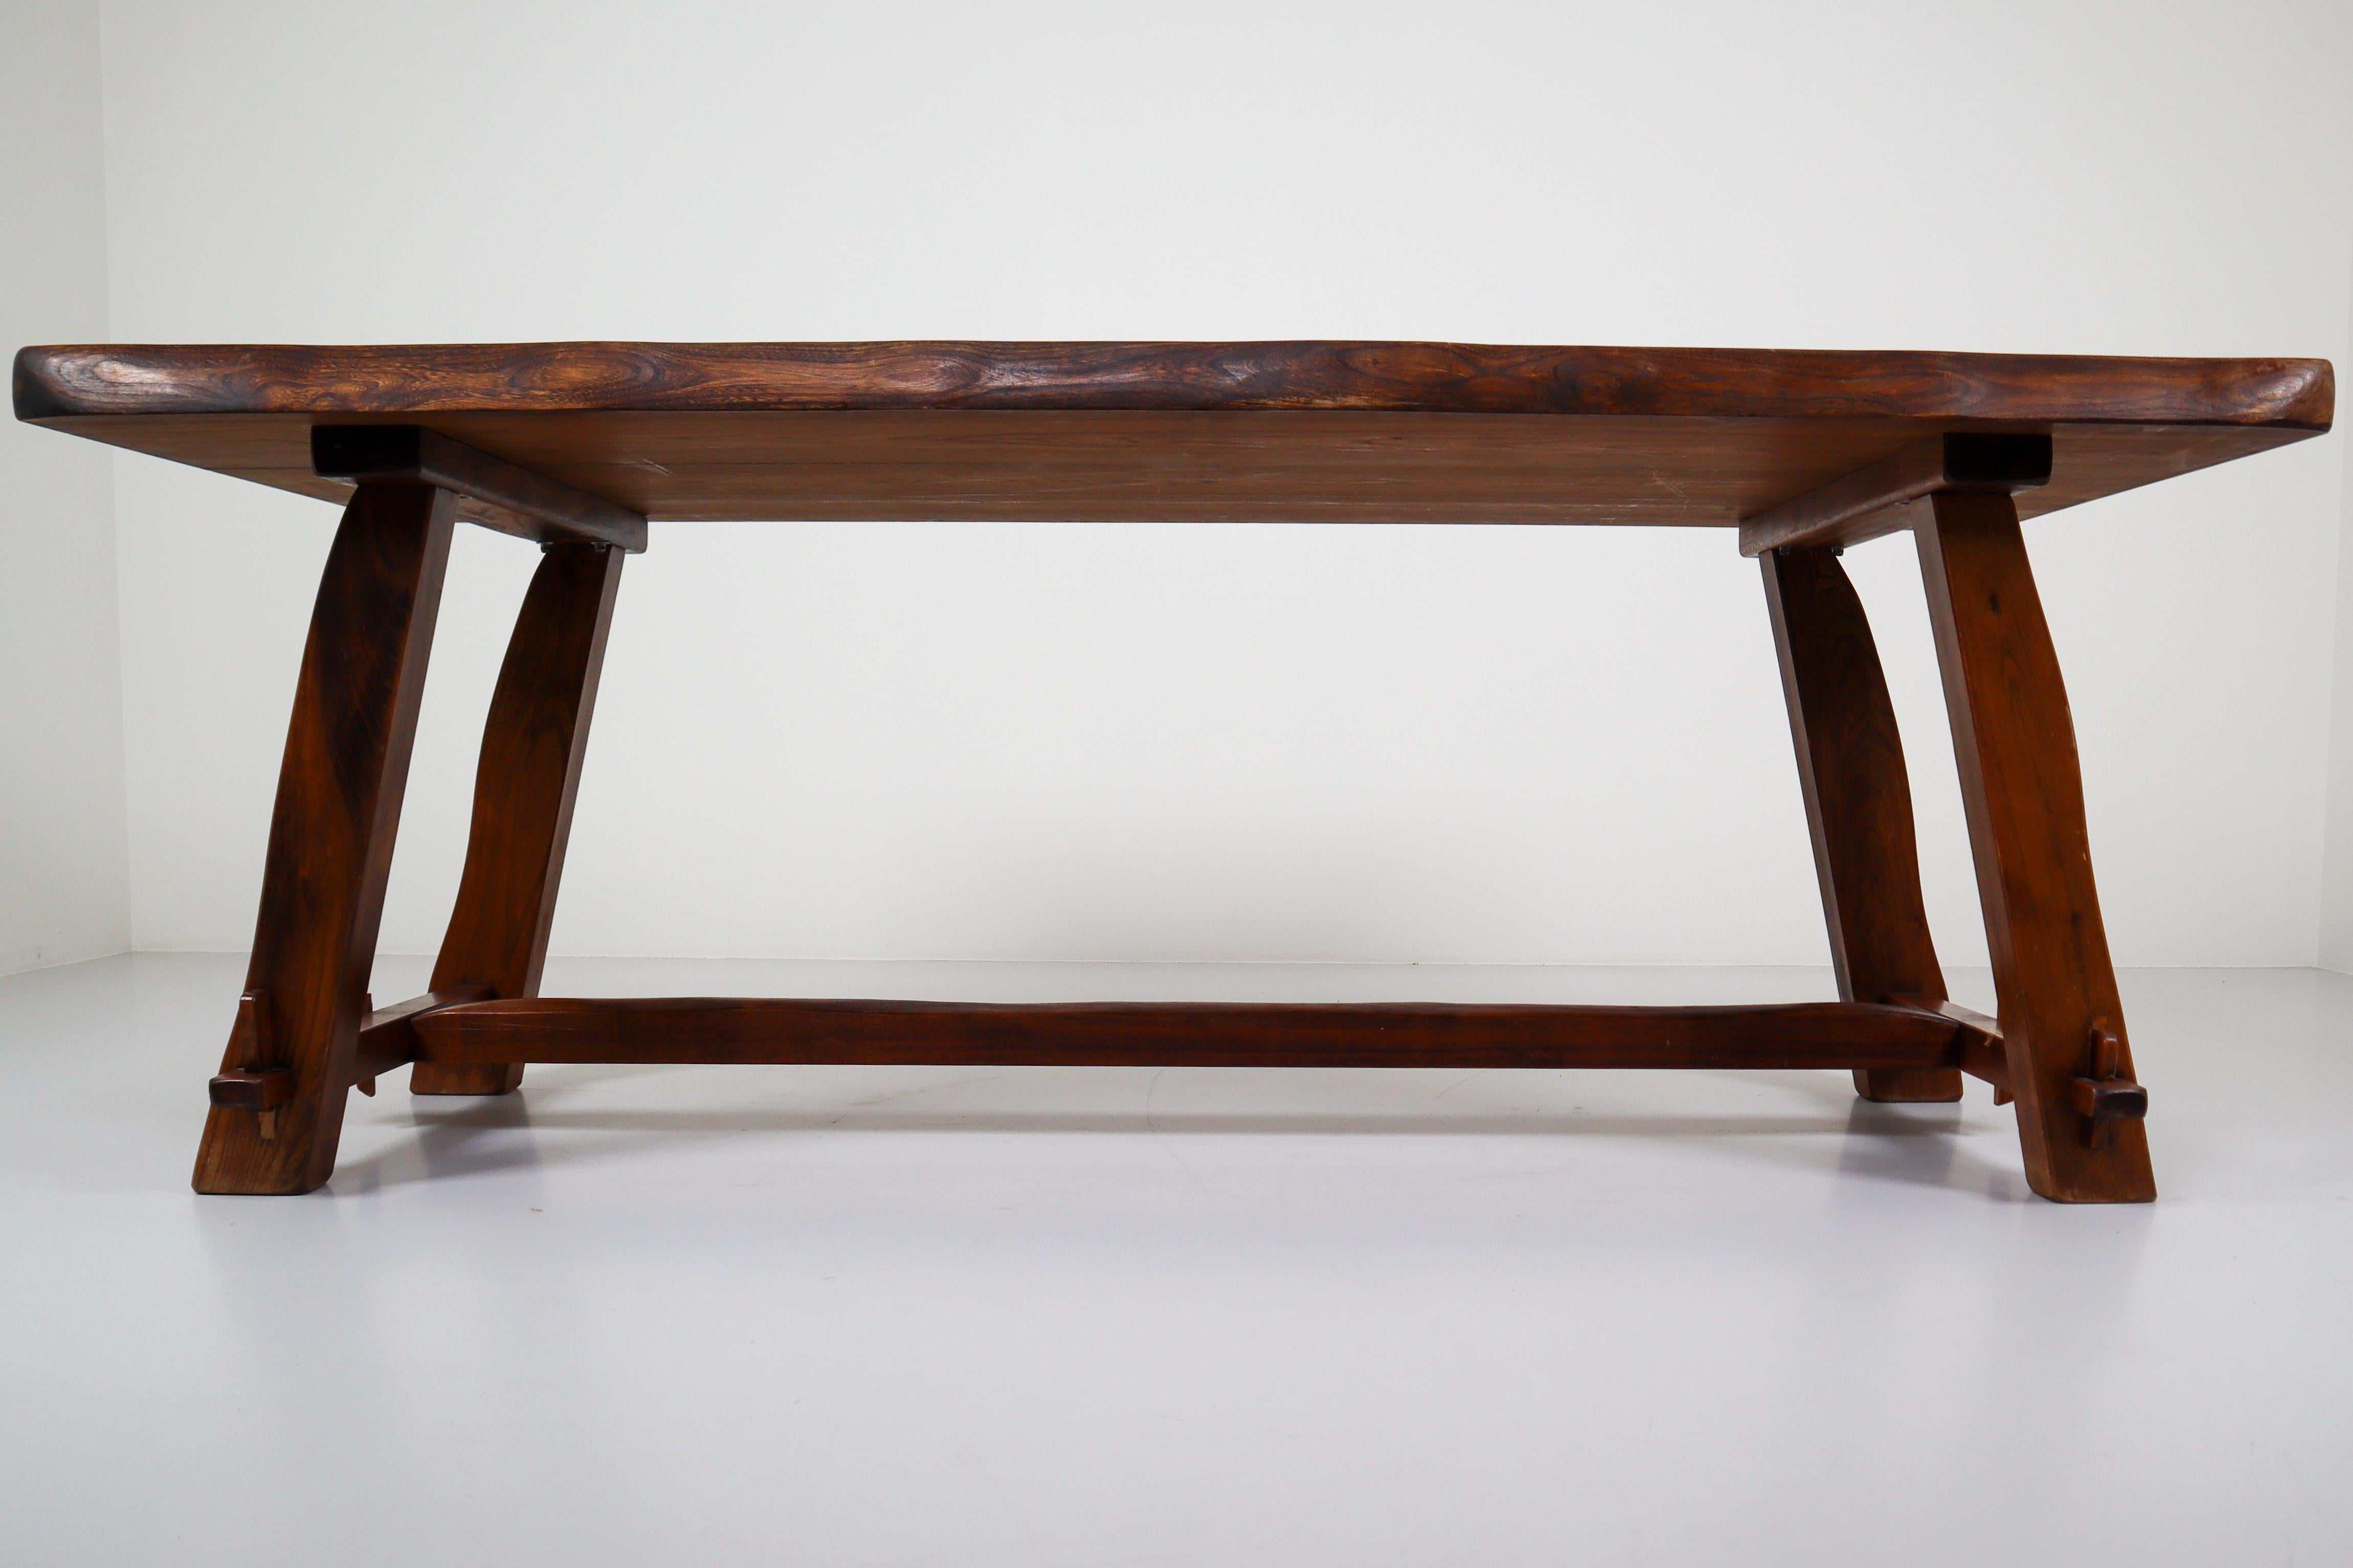 This table is made of stained elm wood and sculpturally crafted by hand very minimalistic, yet Brutalist shaped and in very good original condition. Its generous dimensions of 200 cm by 90 cm can accommodate up to 8 people each table. Very good